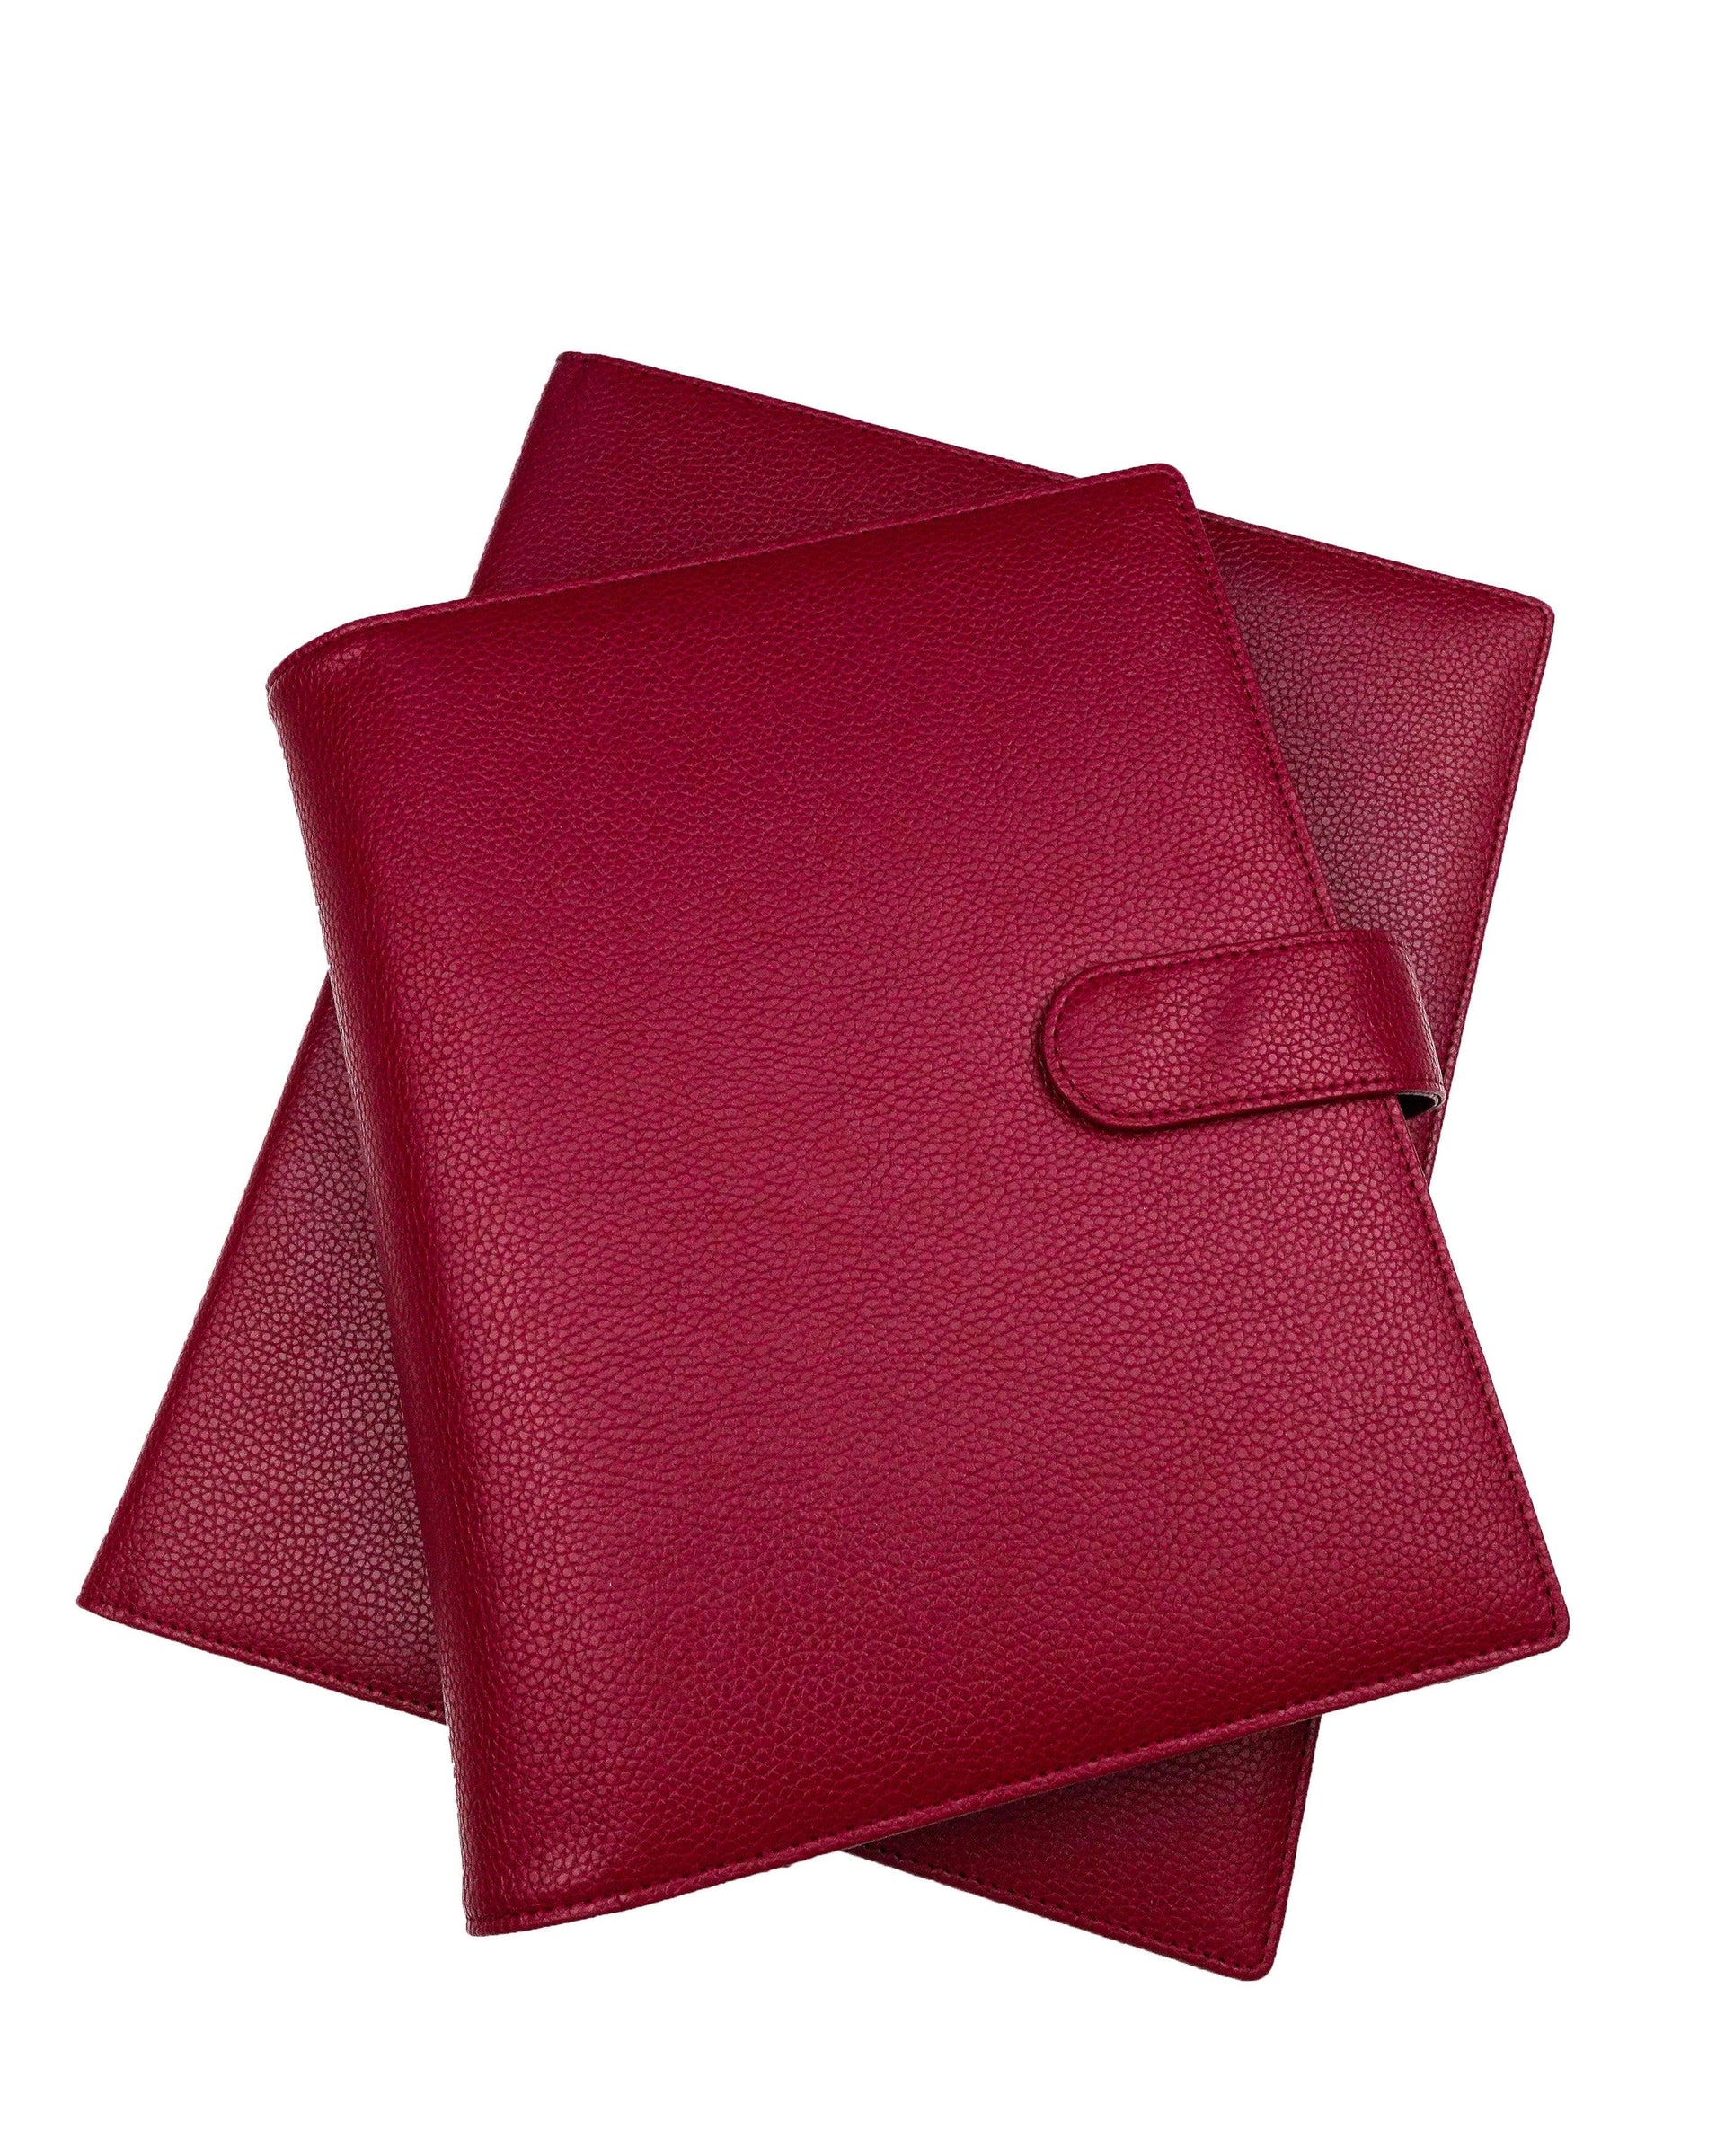 Red Co. Brown Faux Leather Photo Album with Self Adhesive Sheets